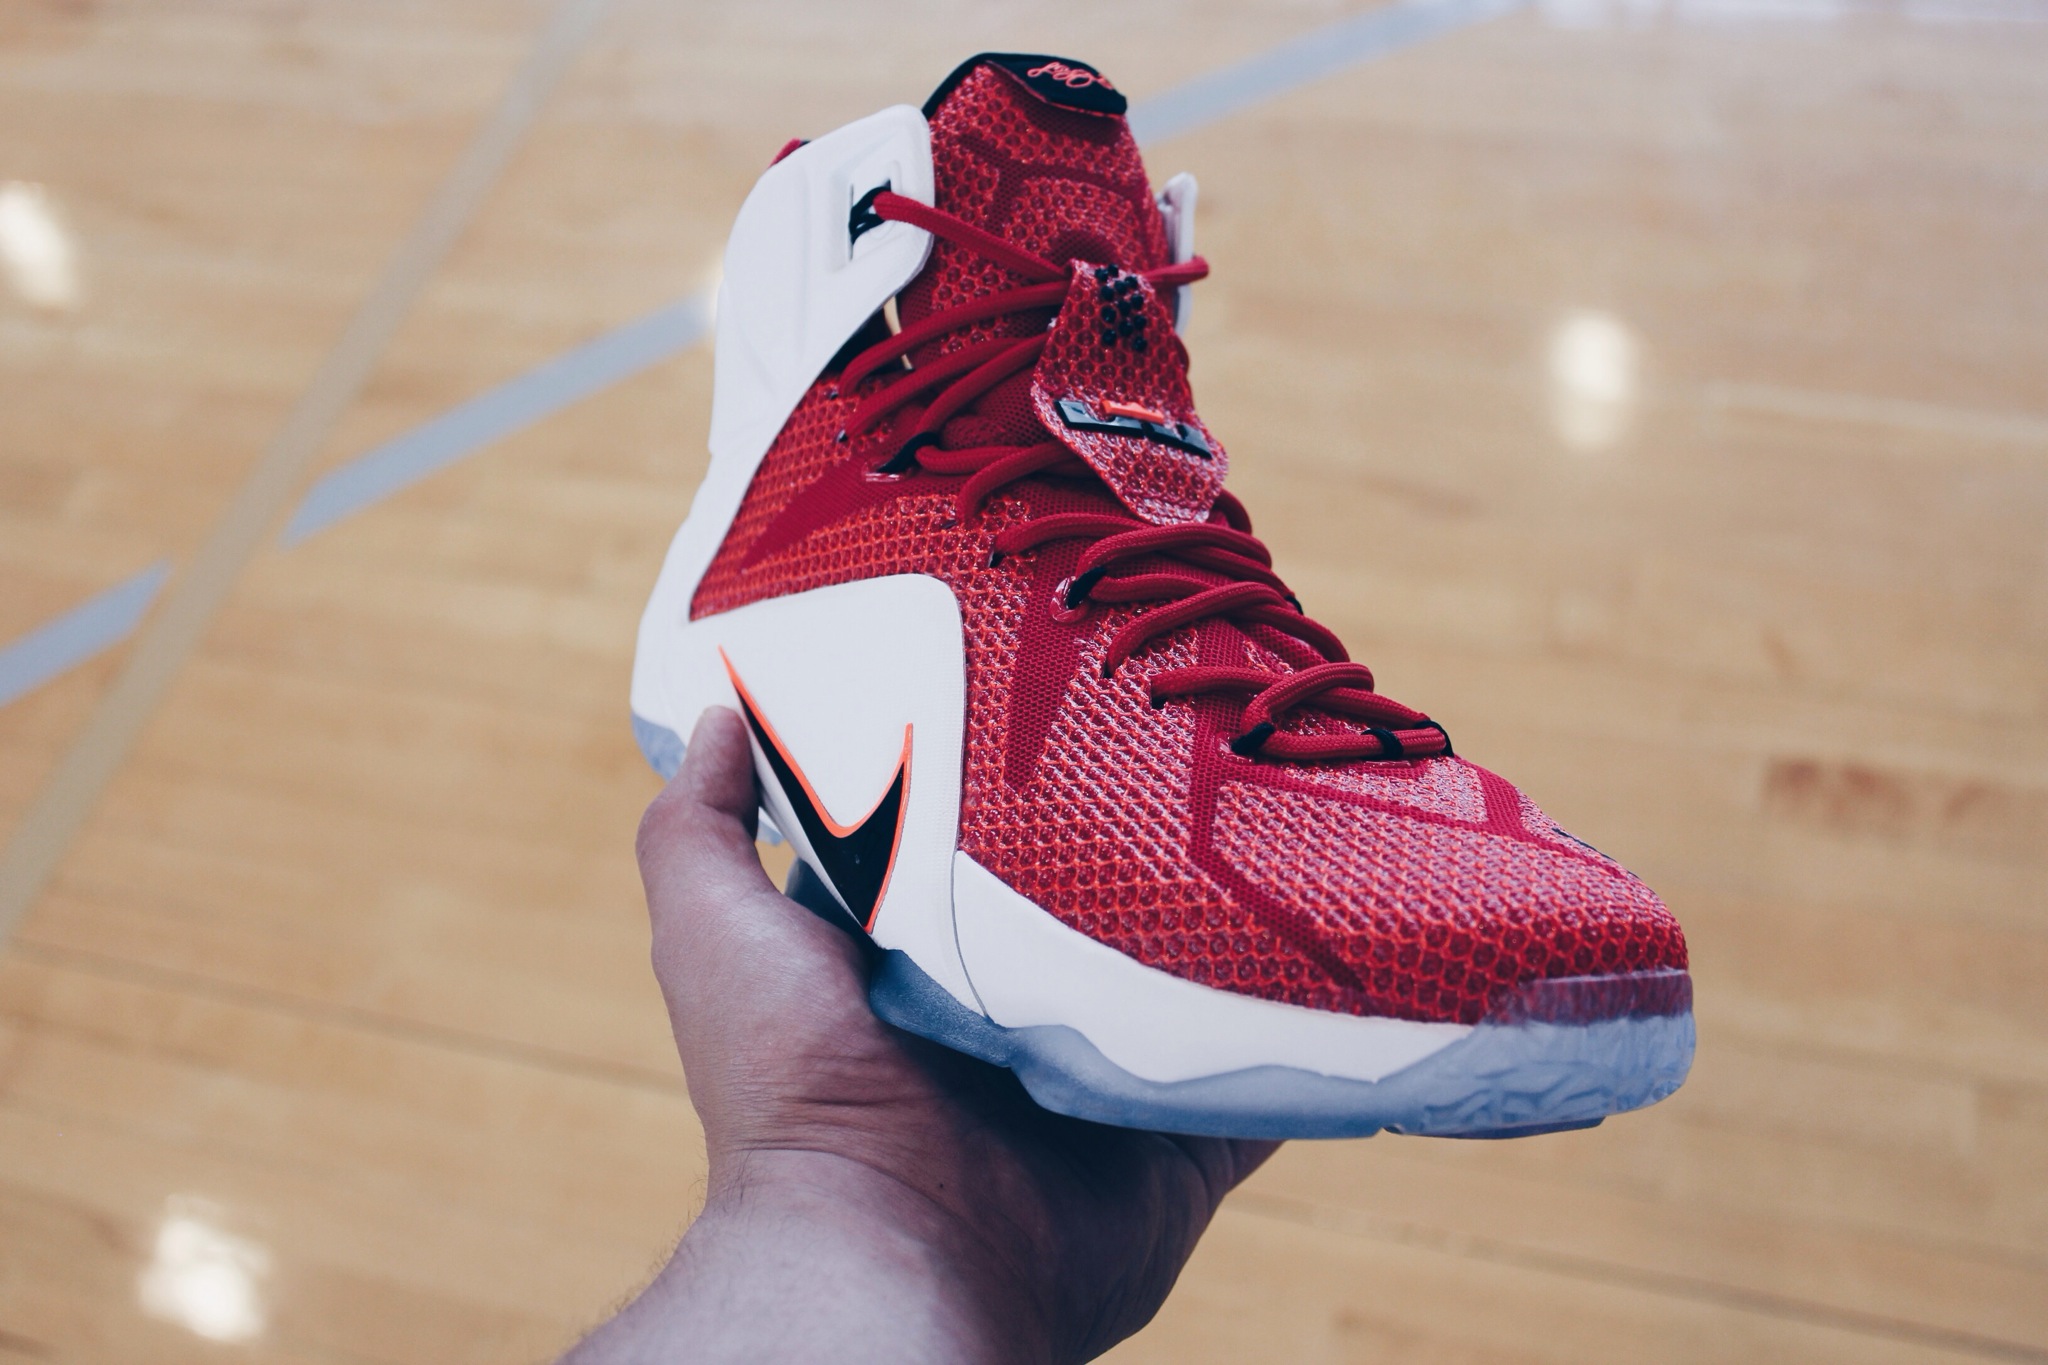 Nike LeBron 12 “Heart of a Lion” – Release Date